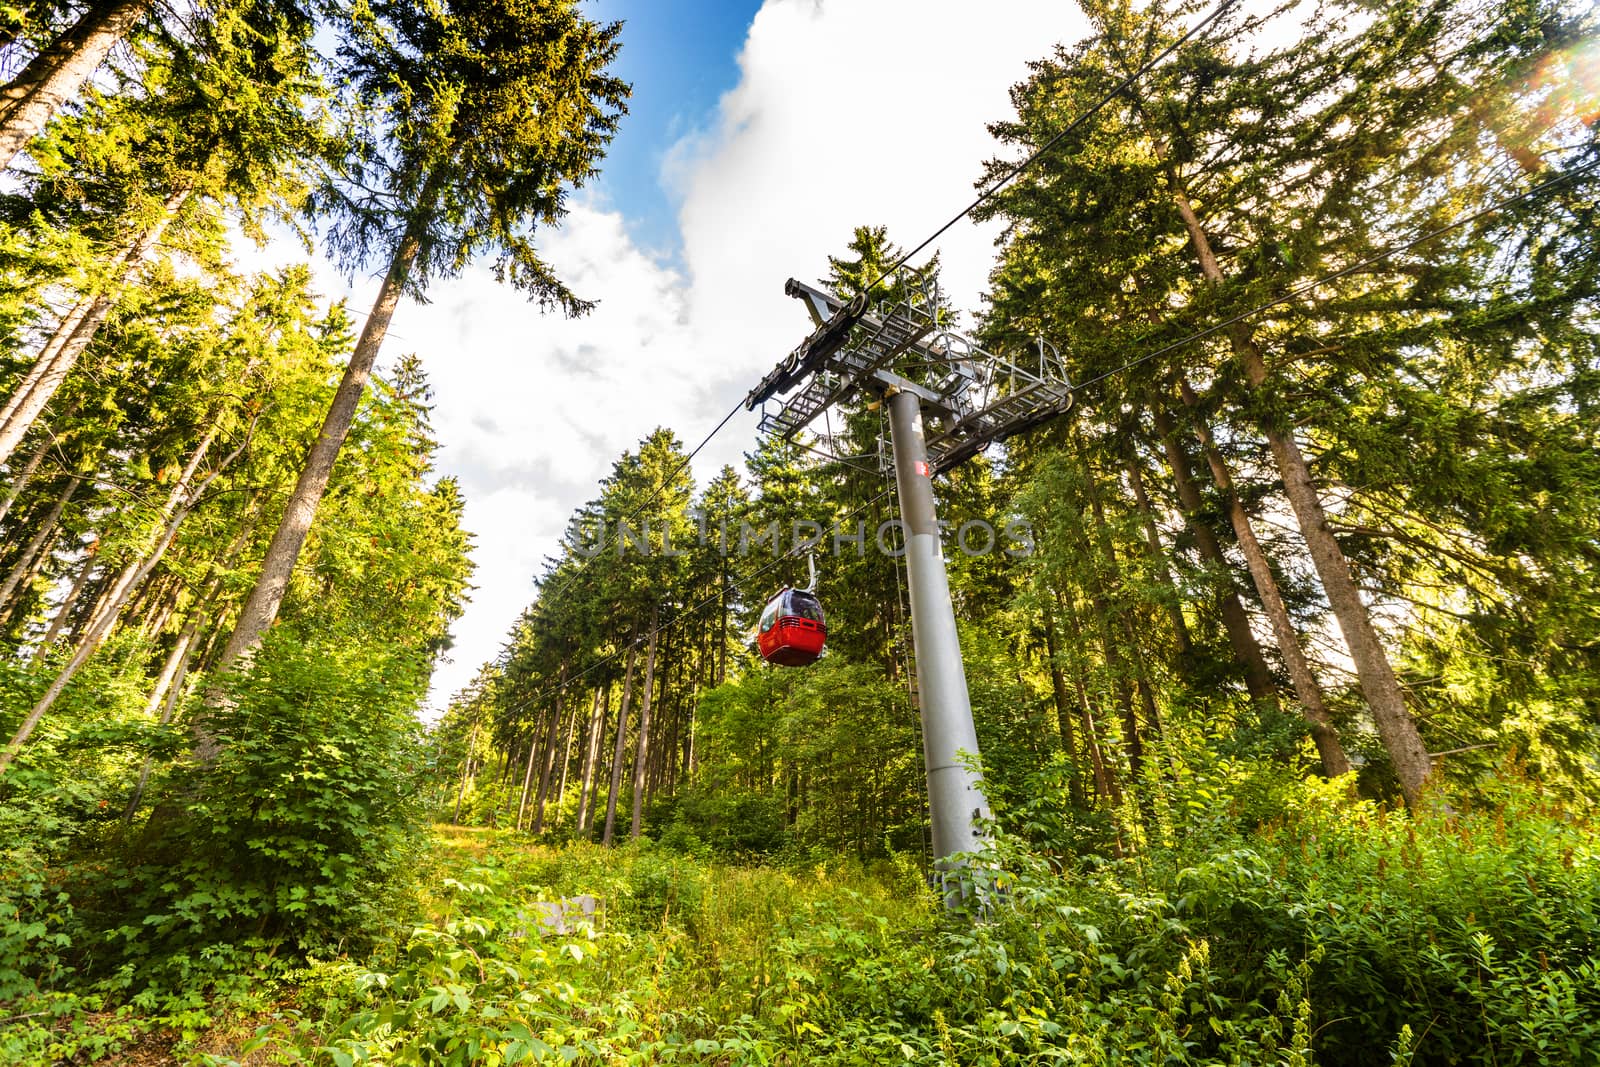 Mountain lift going up in a green forest in the summer sun